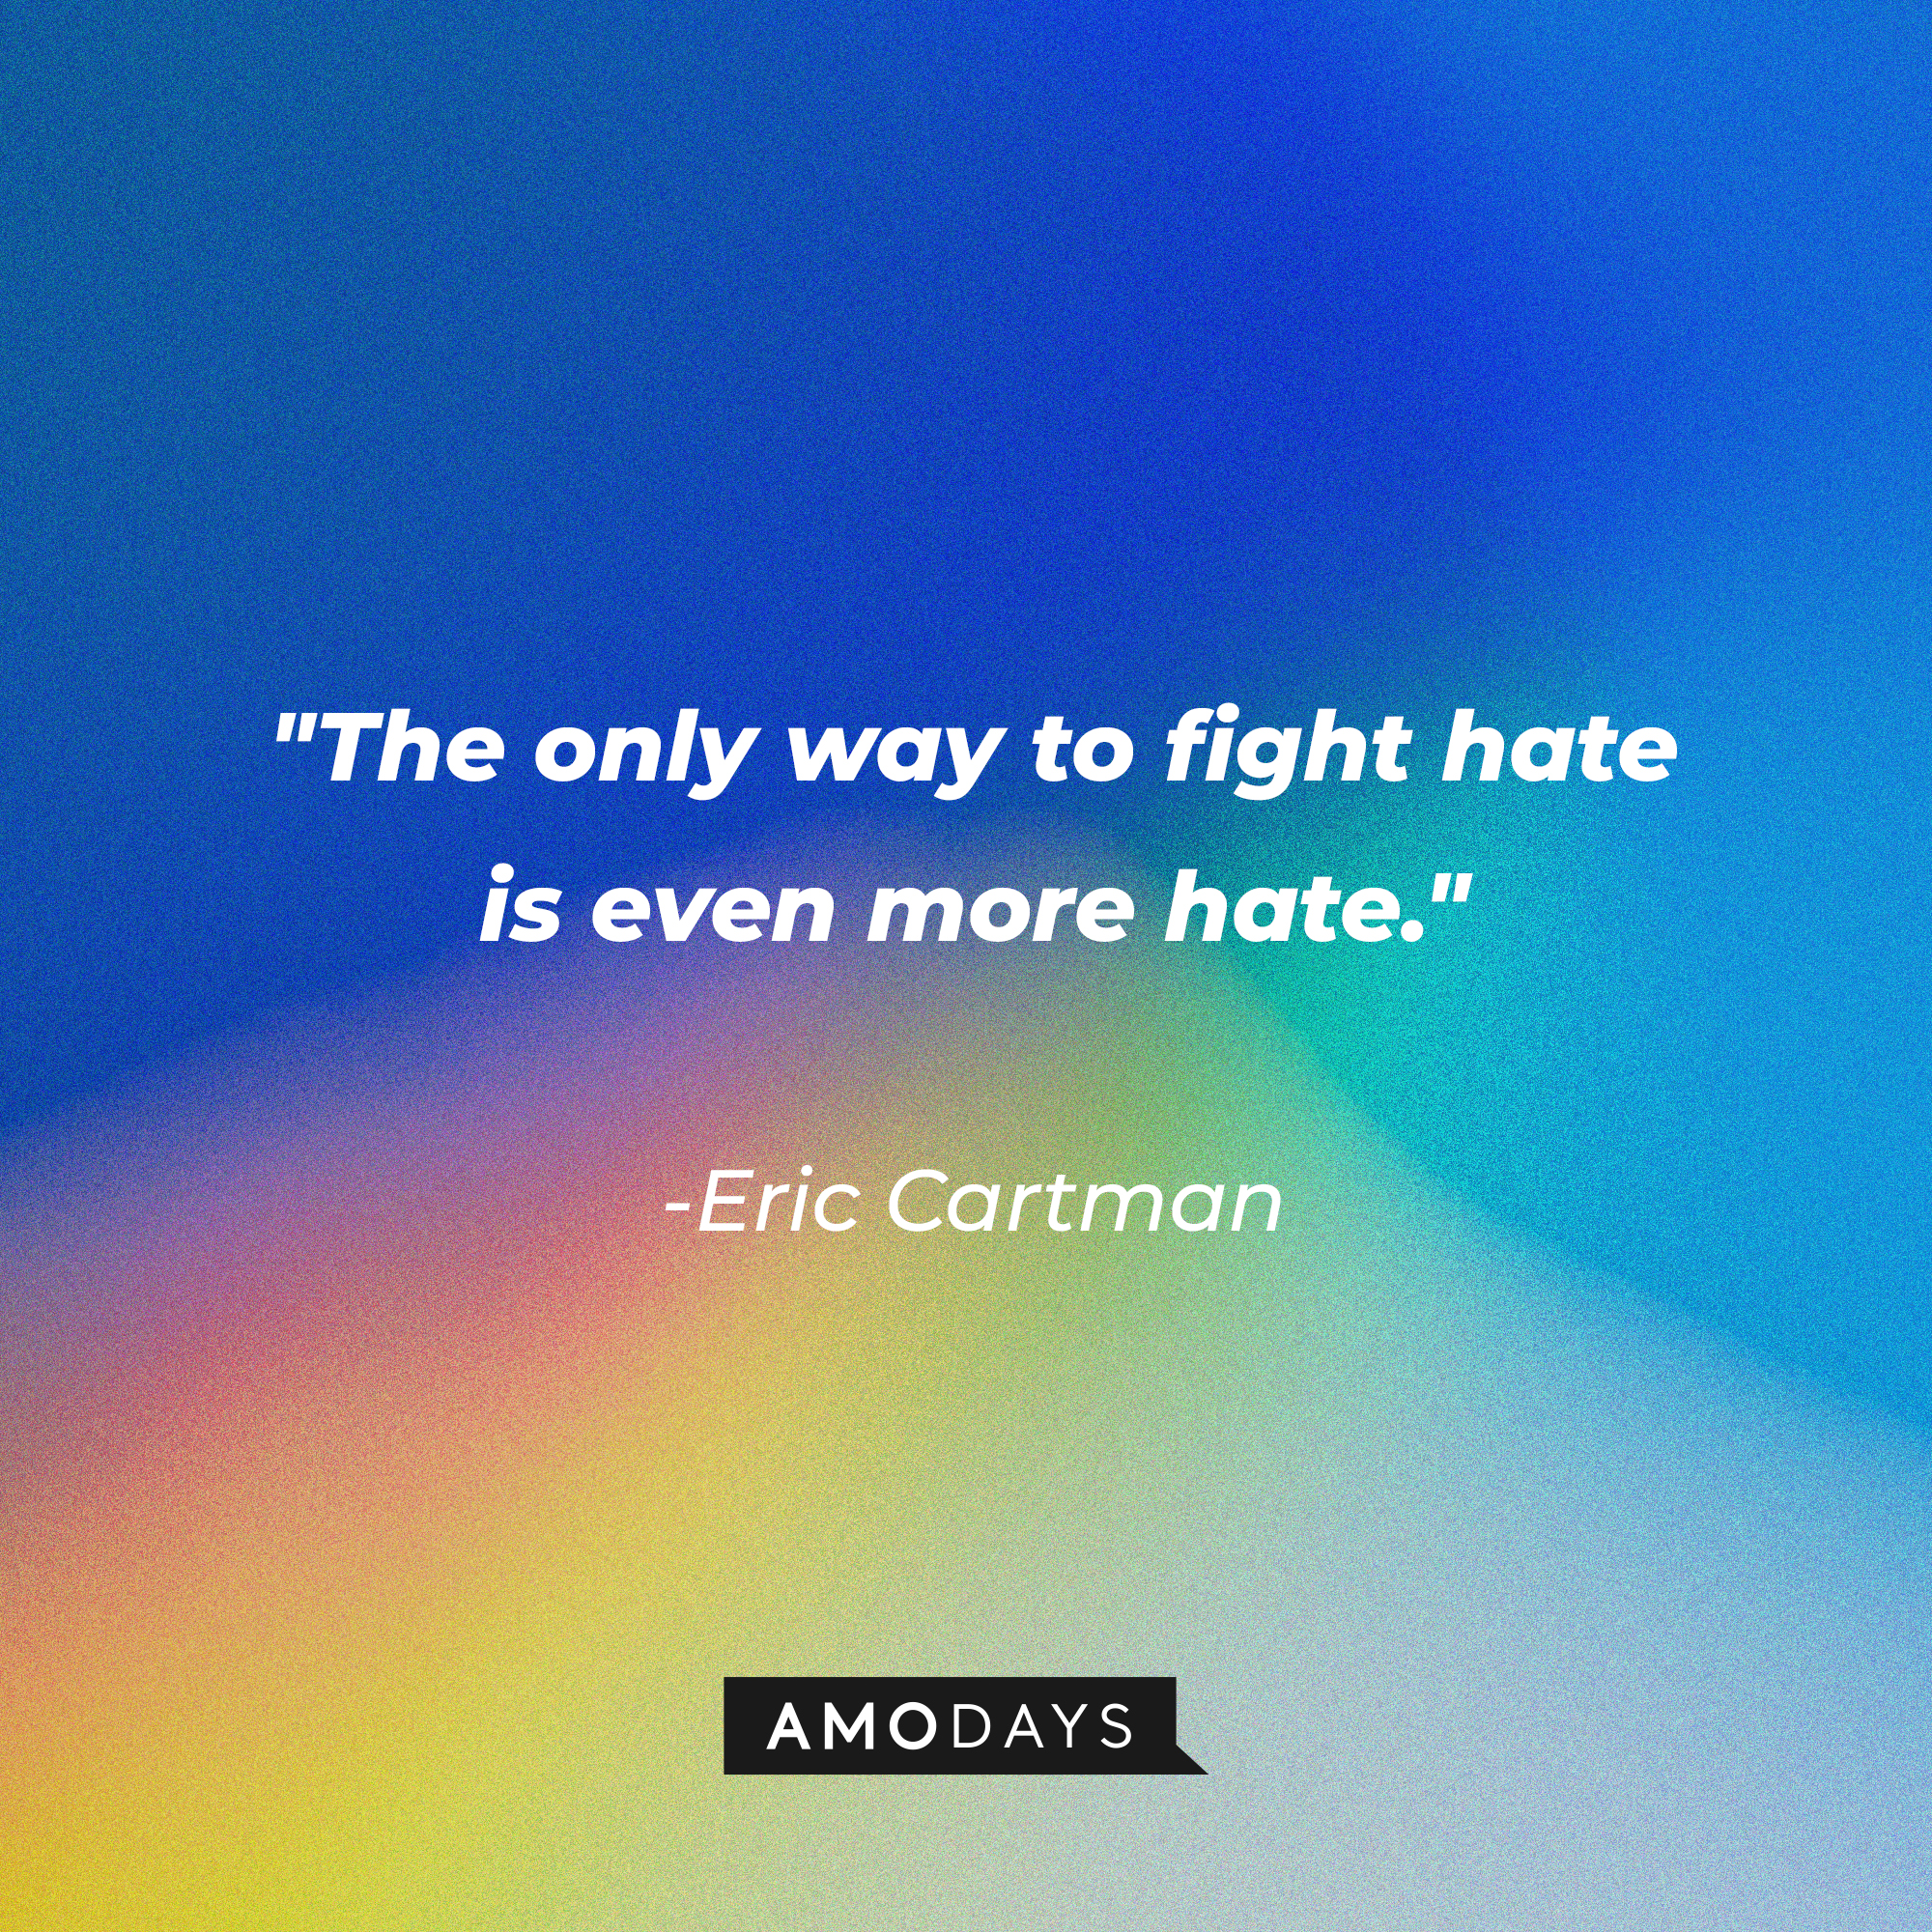 Eric Cartman's quote: "The only way to fight hate is even more hate." | Source: AmoDays